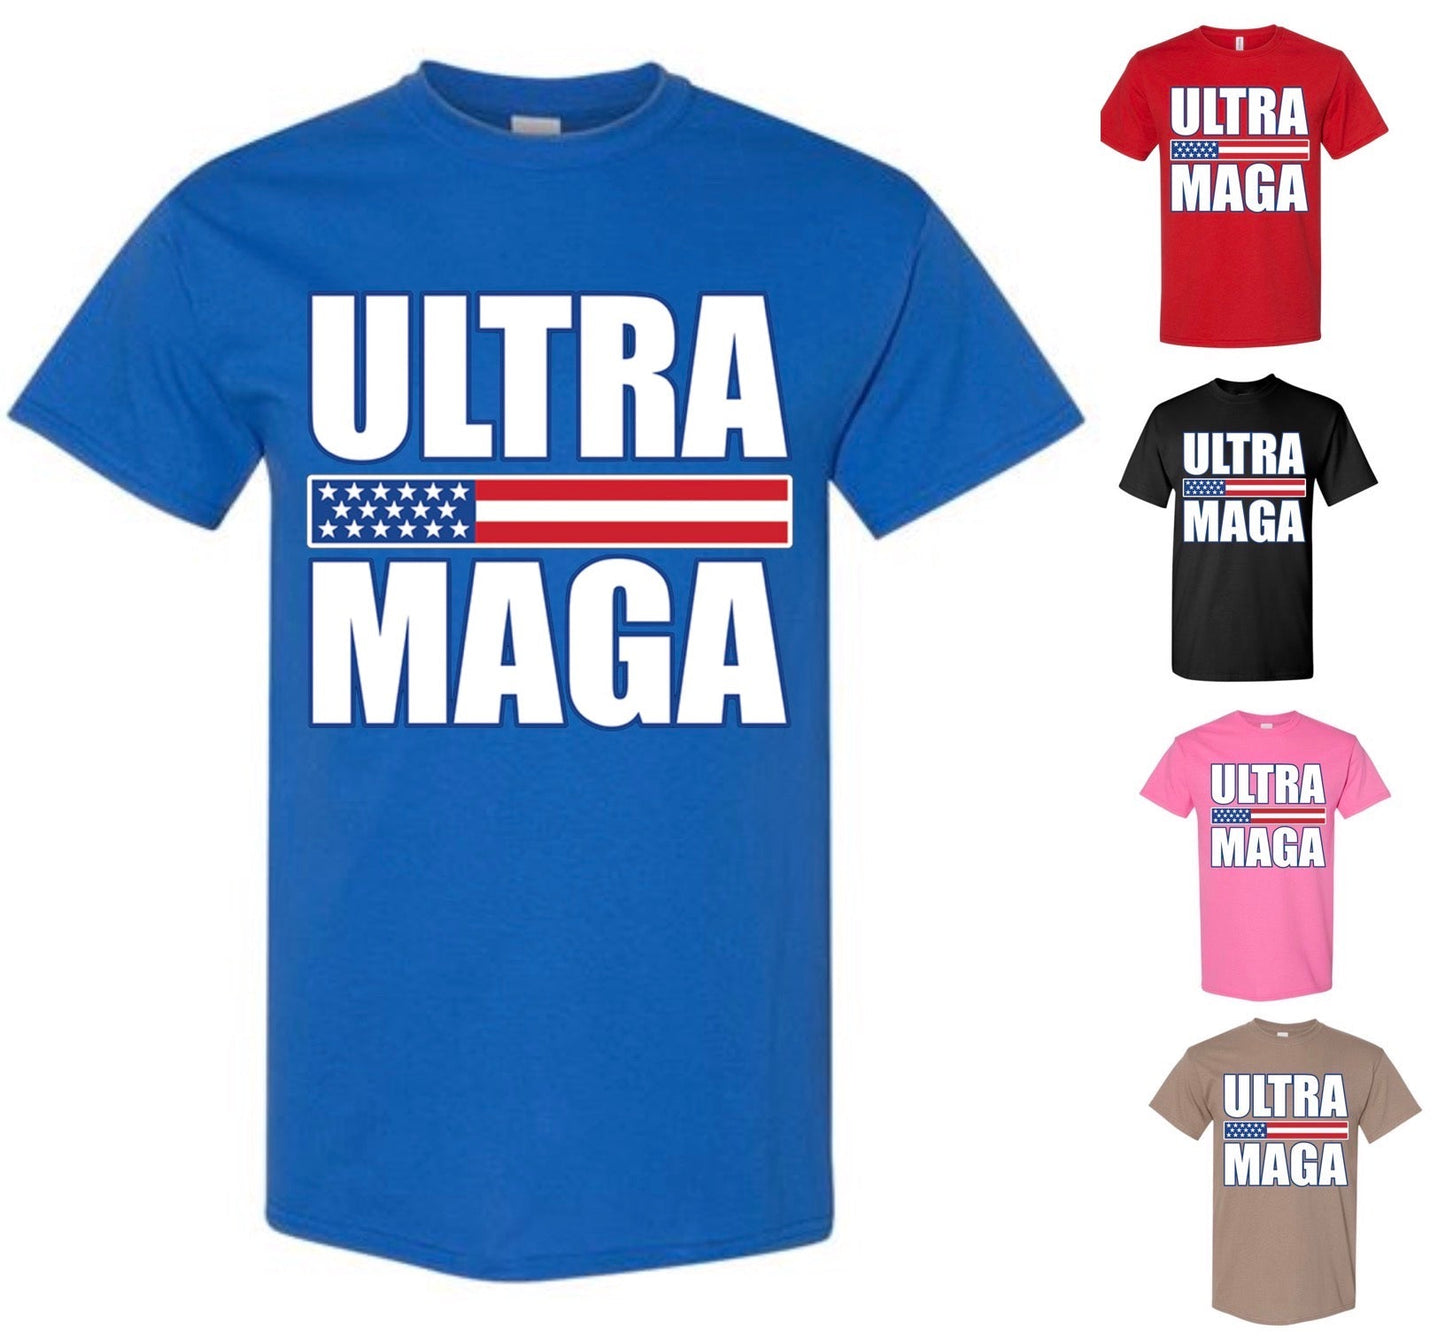 Ultra MAGA T-Shirt — 4th of July Special (FREE Shipping)